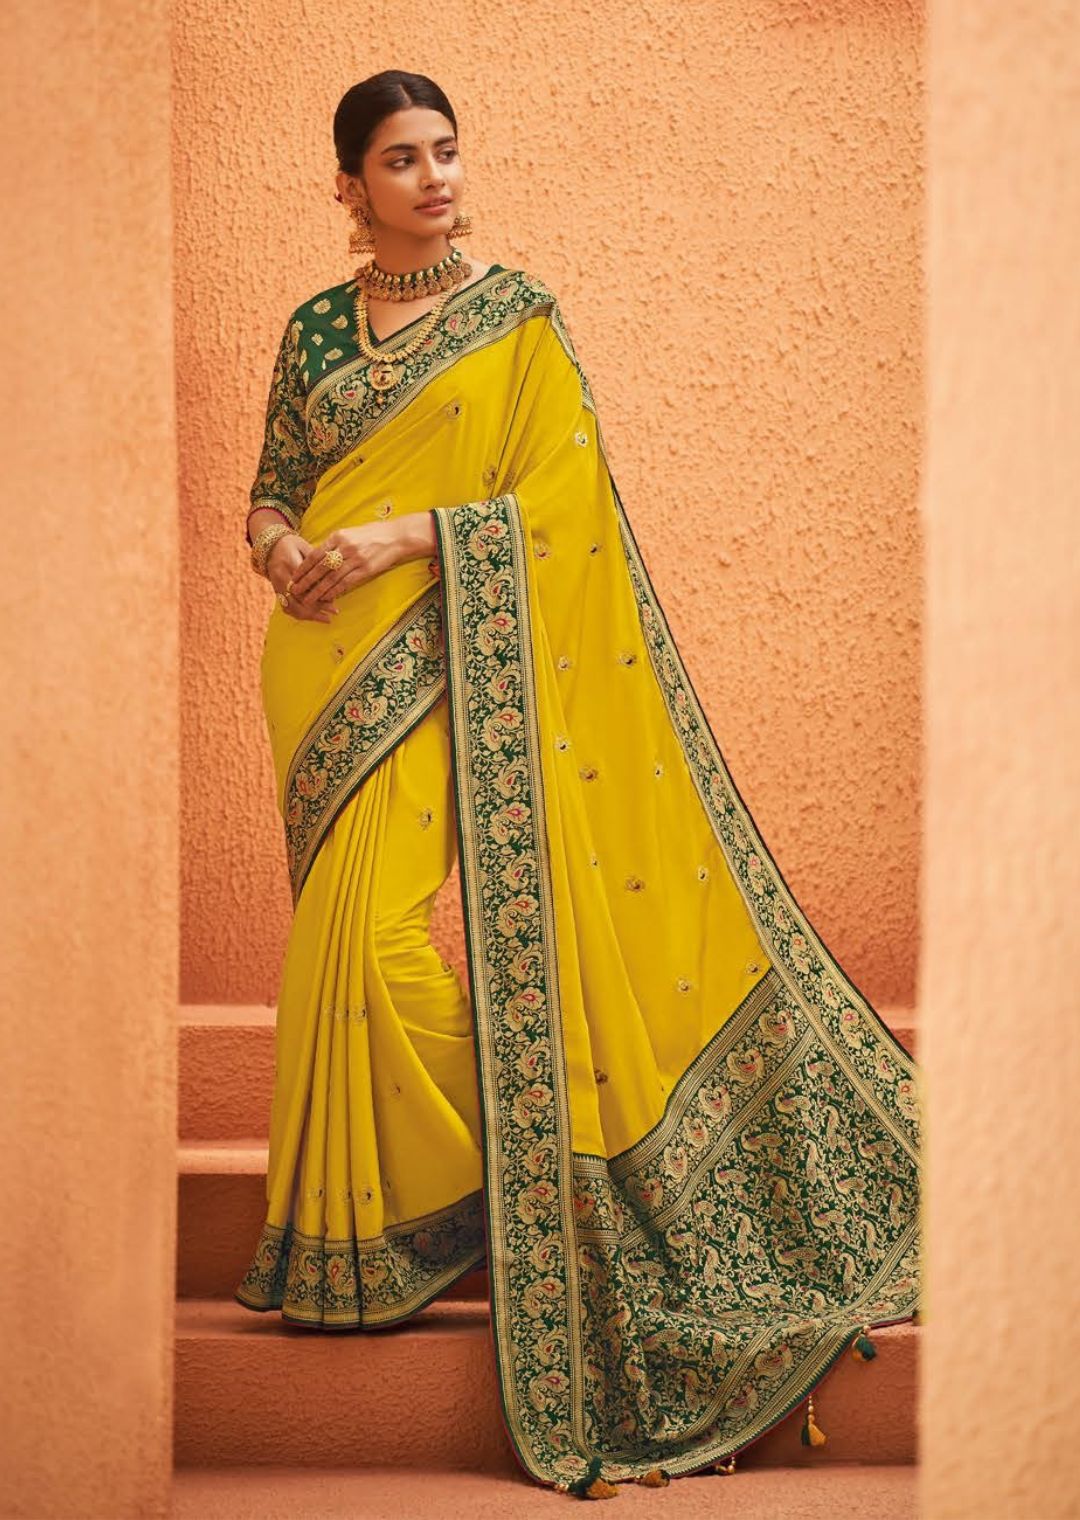 Which colour blouse will suit for a lemon yellow saree? - Quora